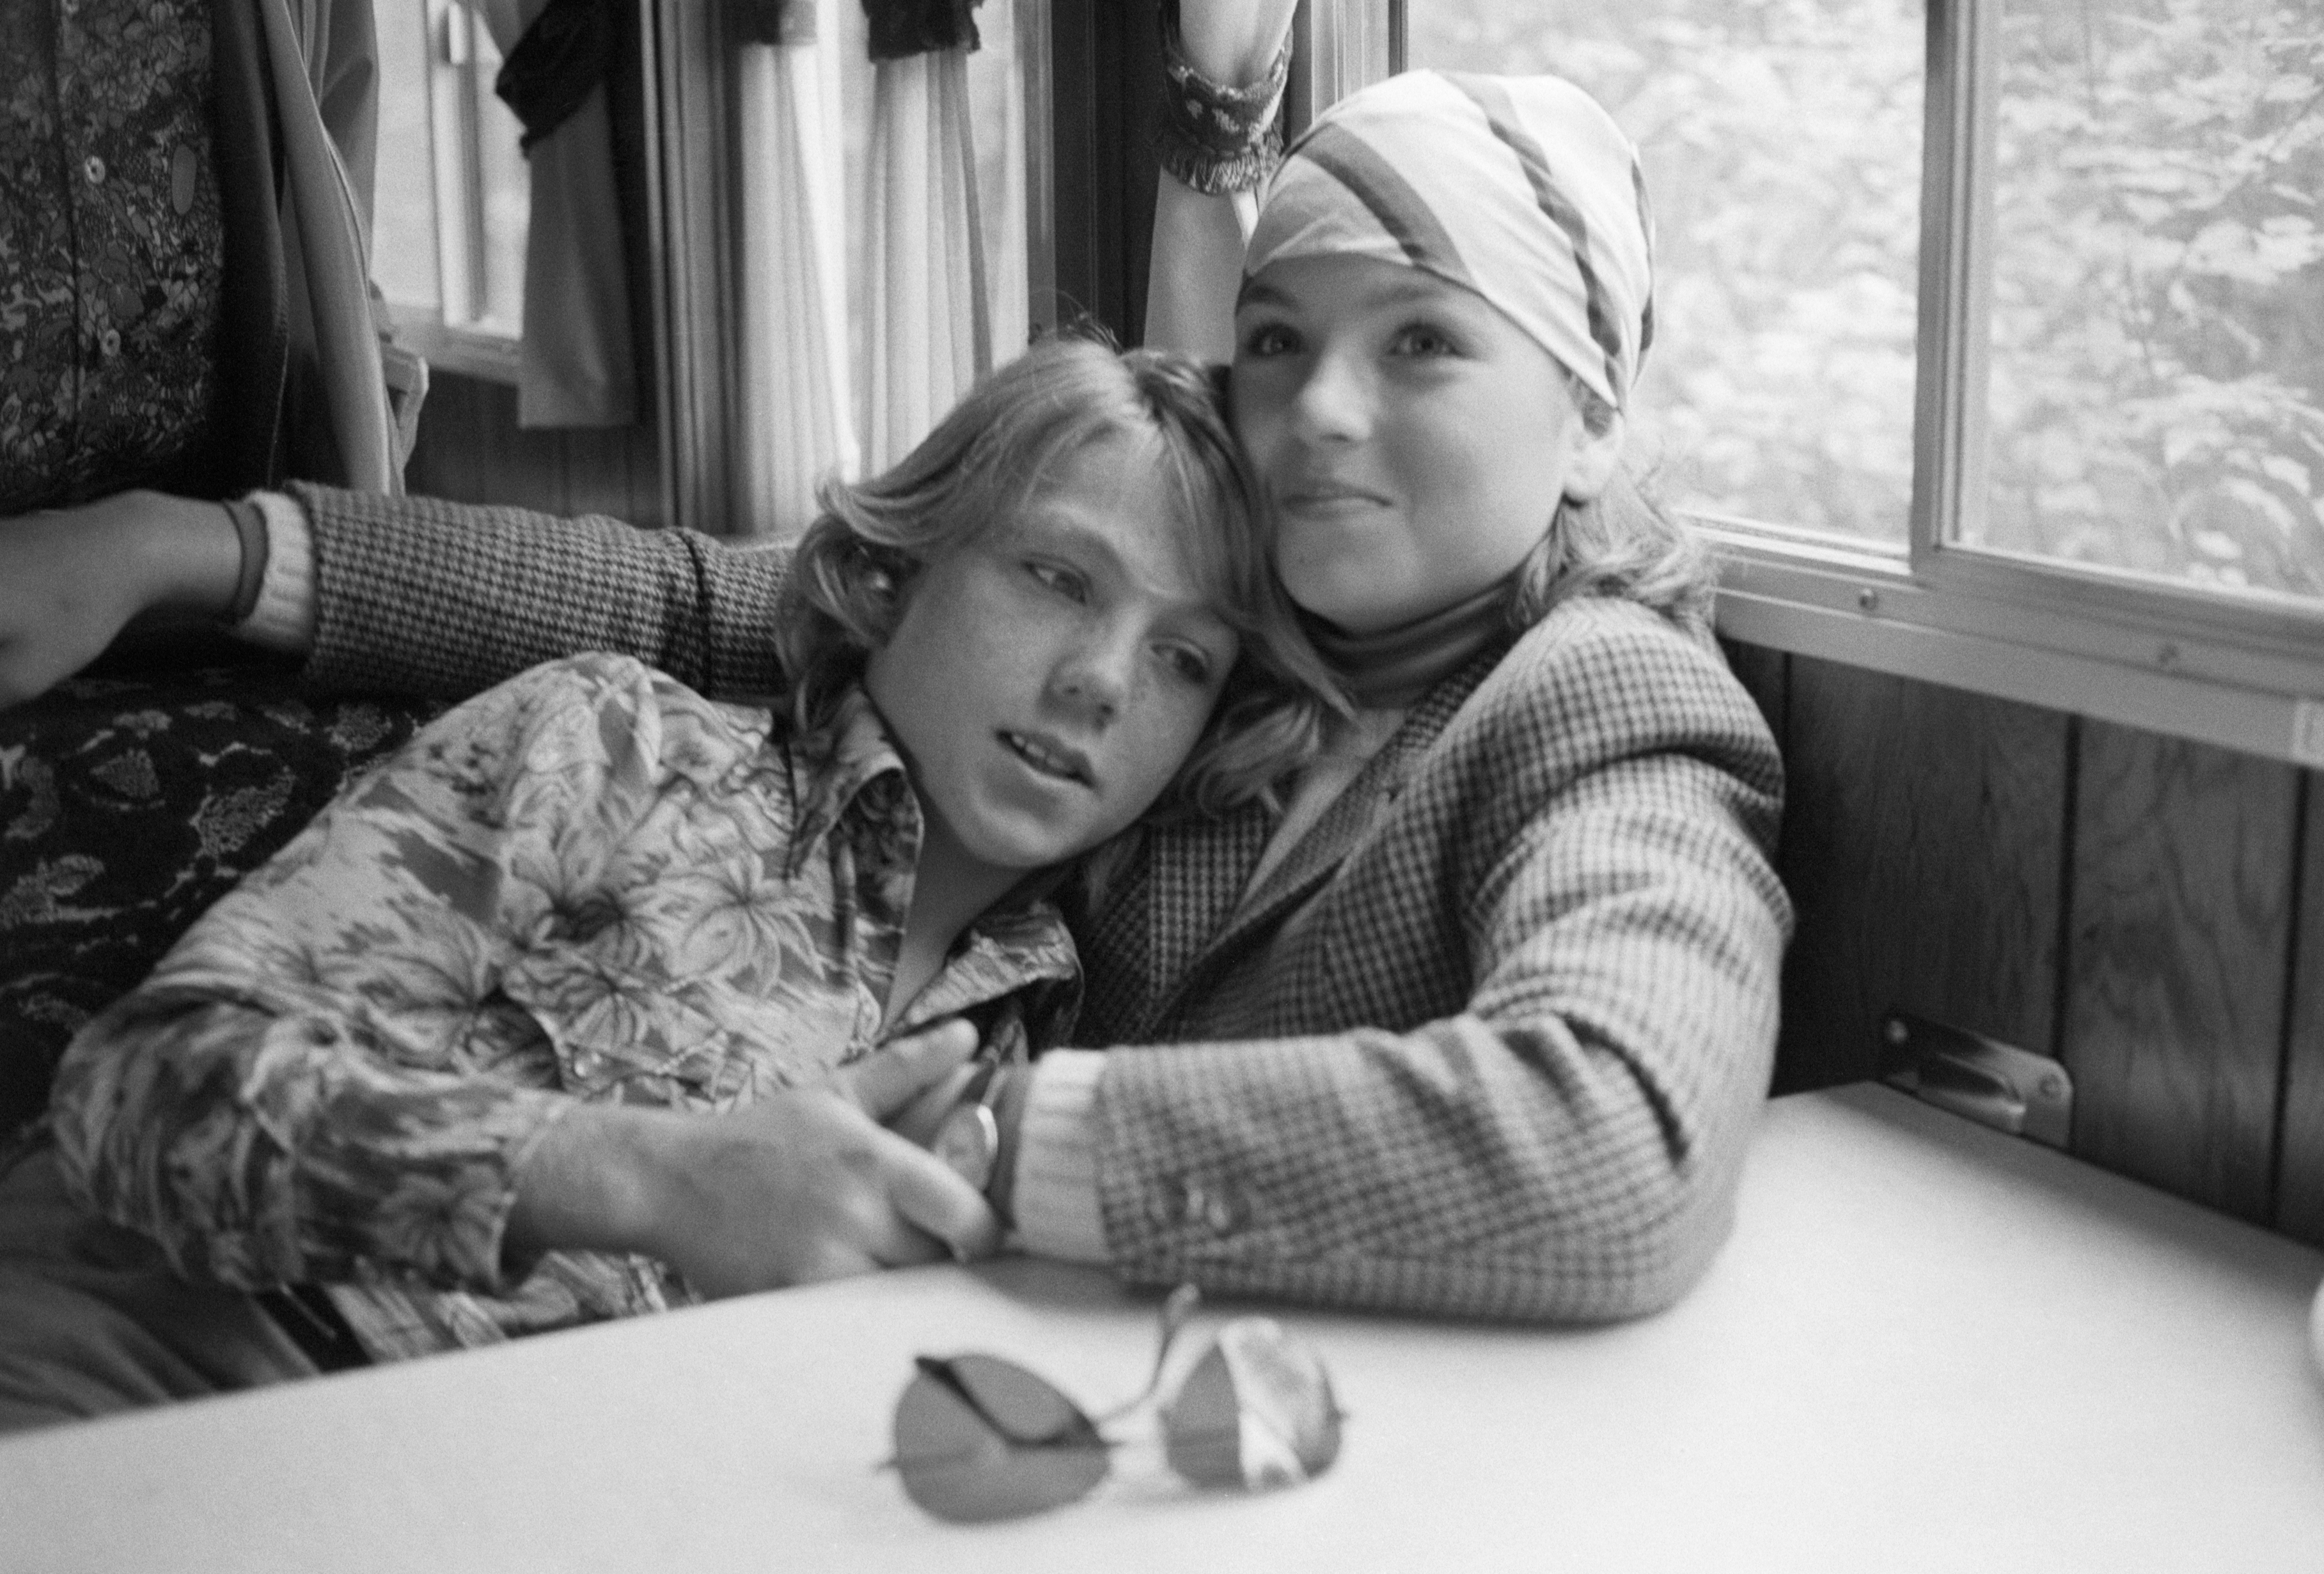 Griffin O'Neal and Tatum O'Neal photographed 1977 | Source: Getty Images